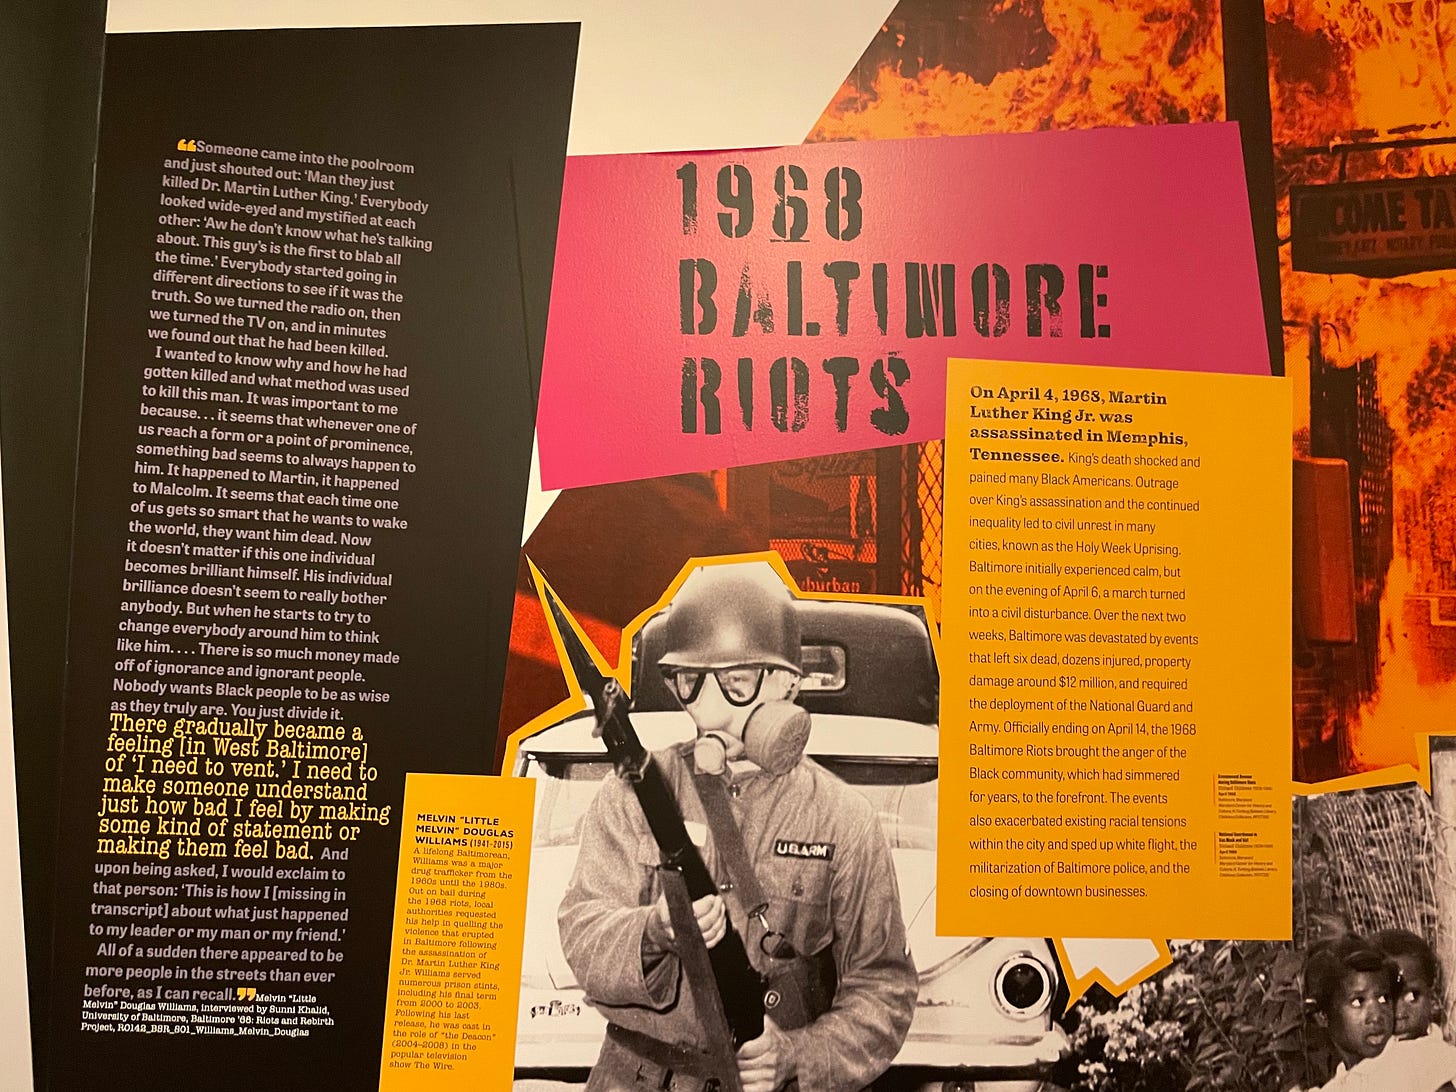 A series of museum display panels with the text heading “1968 BALTIMORE RIOTS.” Accompanying images include flaming buildings and a person dressed in riot gear.